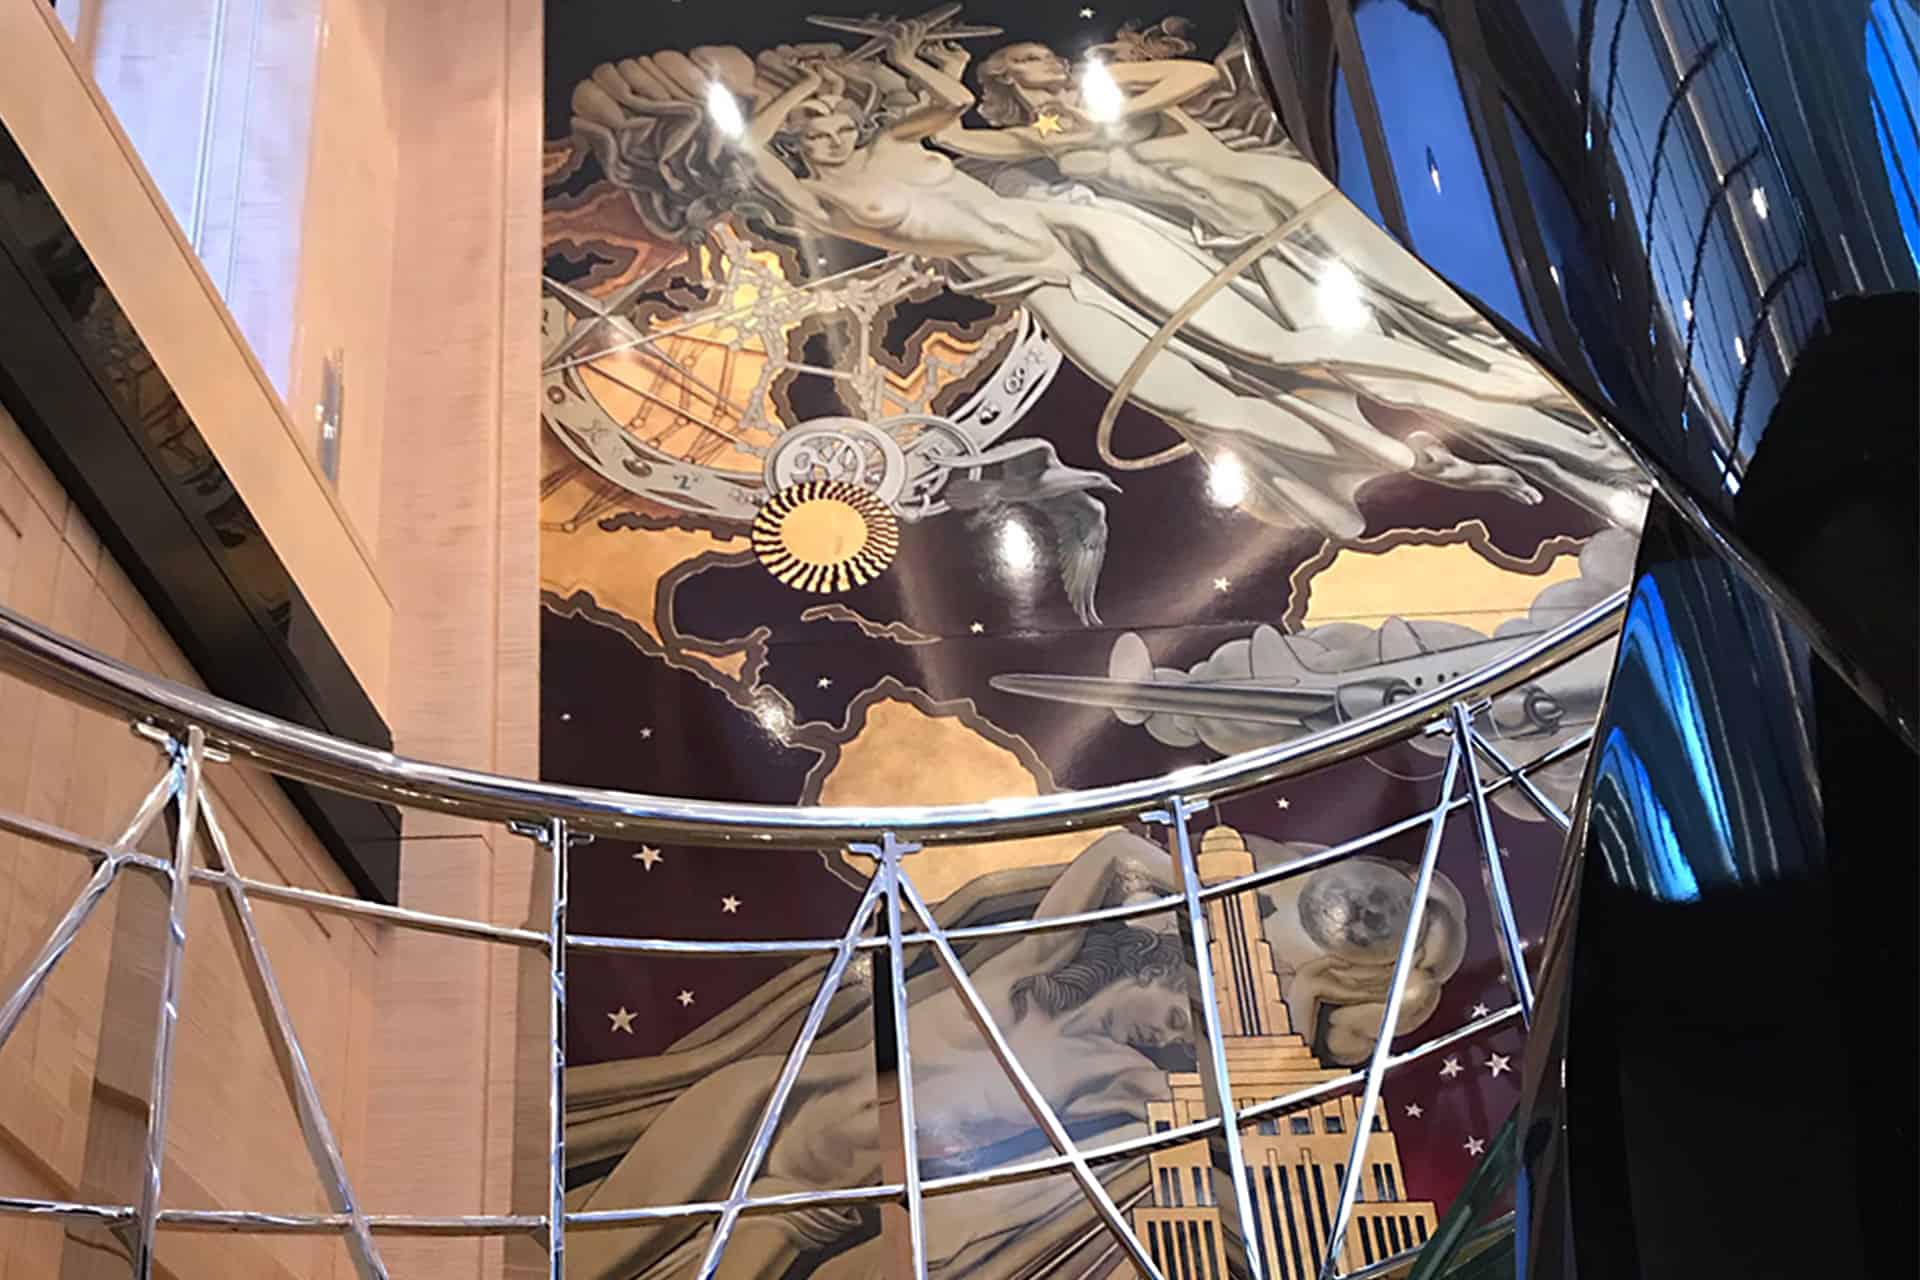 Hand painted and gilded mural onboard M/Y Phoenix II. Photo by DKT Artworks.